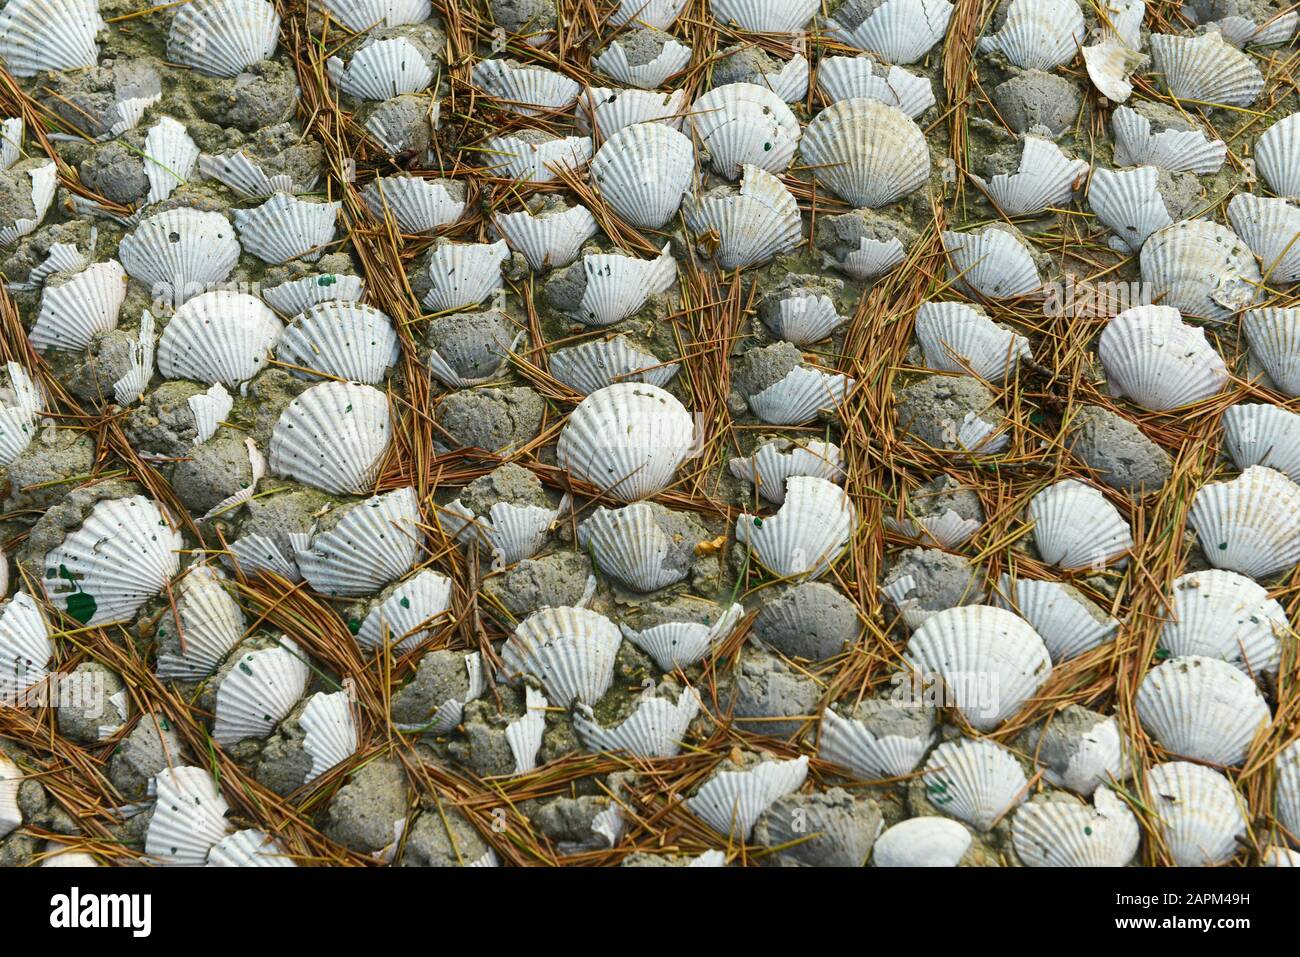 An unusual shell-covered concrete path feature in Signal Hill park in central Qingdao, Shandong province, China, with shells radiating out. Stock Photo